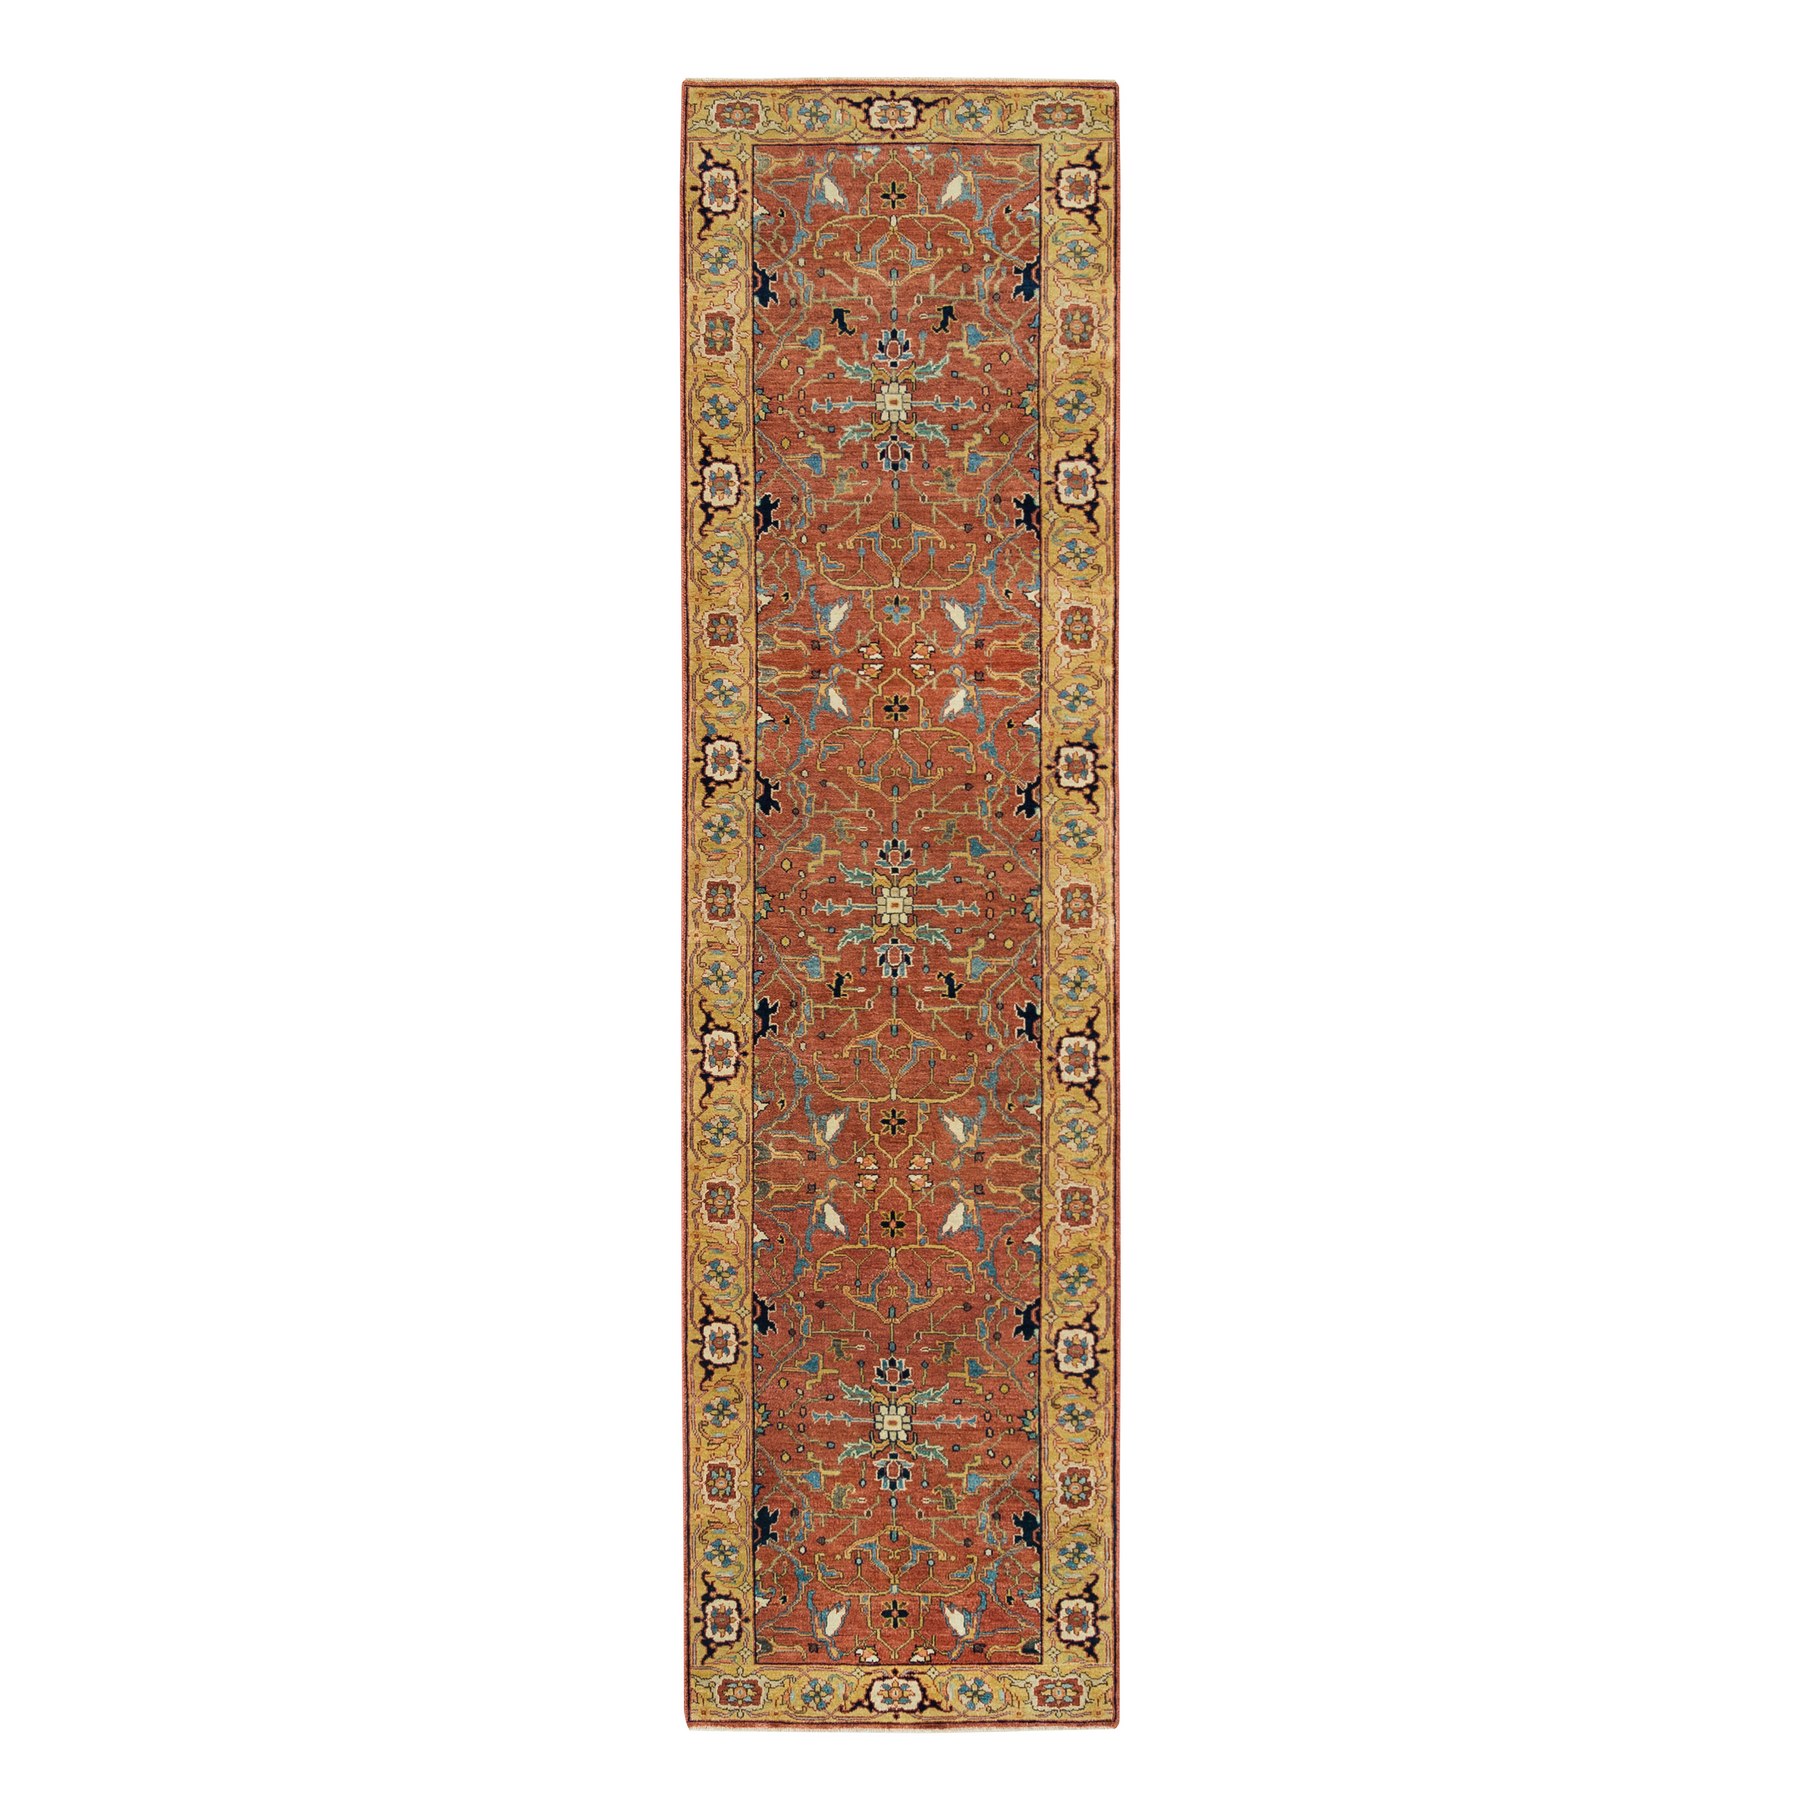 2'7"x 10'3" Terracotta Red With Yellow, Antiqued Fine Heriz Re-Creation, Hand Woven, 100% Wool, Natural Dyes, Runner Oriental Rug 